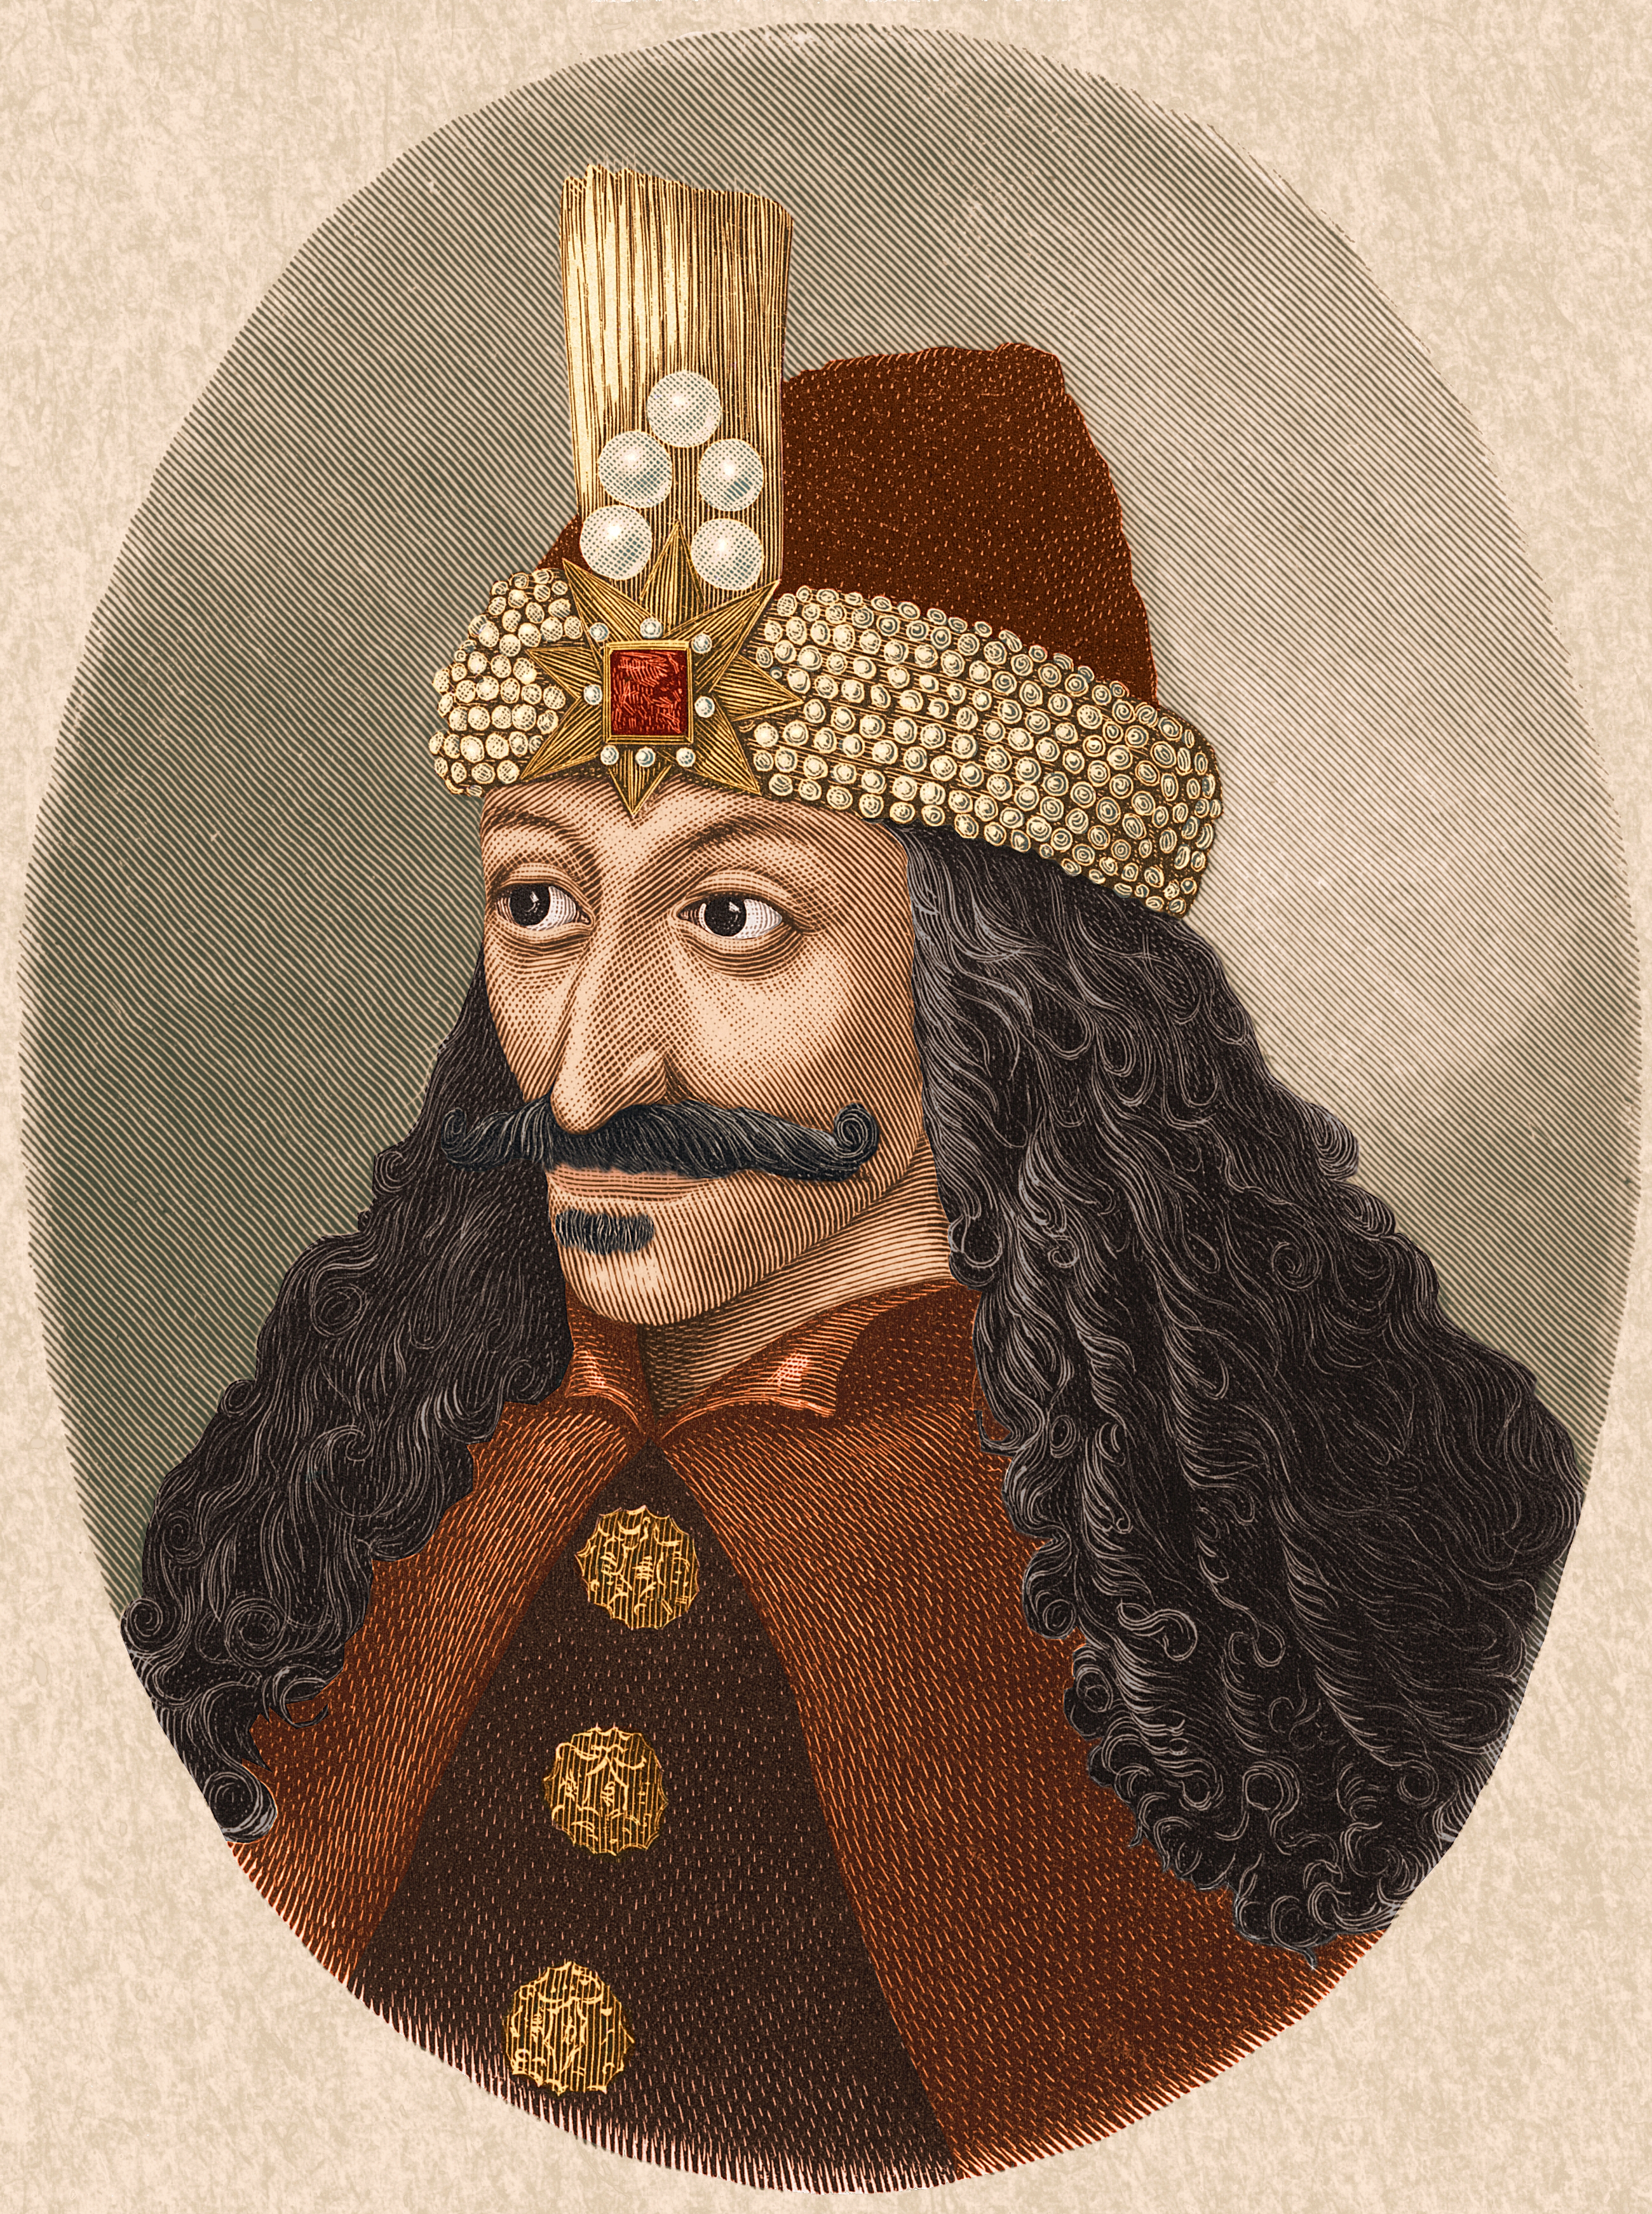 Circa 1450, Portrait of Vlad Tepes  'Vlad the Impaler'(c 1431-1476), from a painting in Castle Ambras in the Tyrol. 